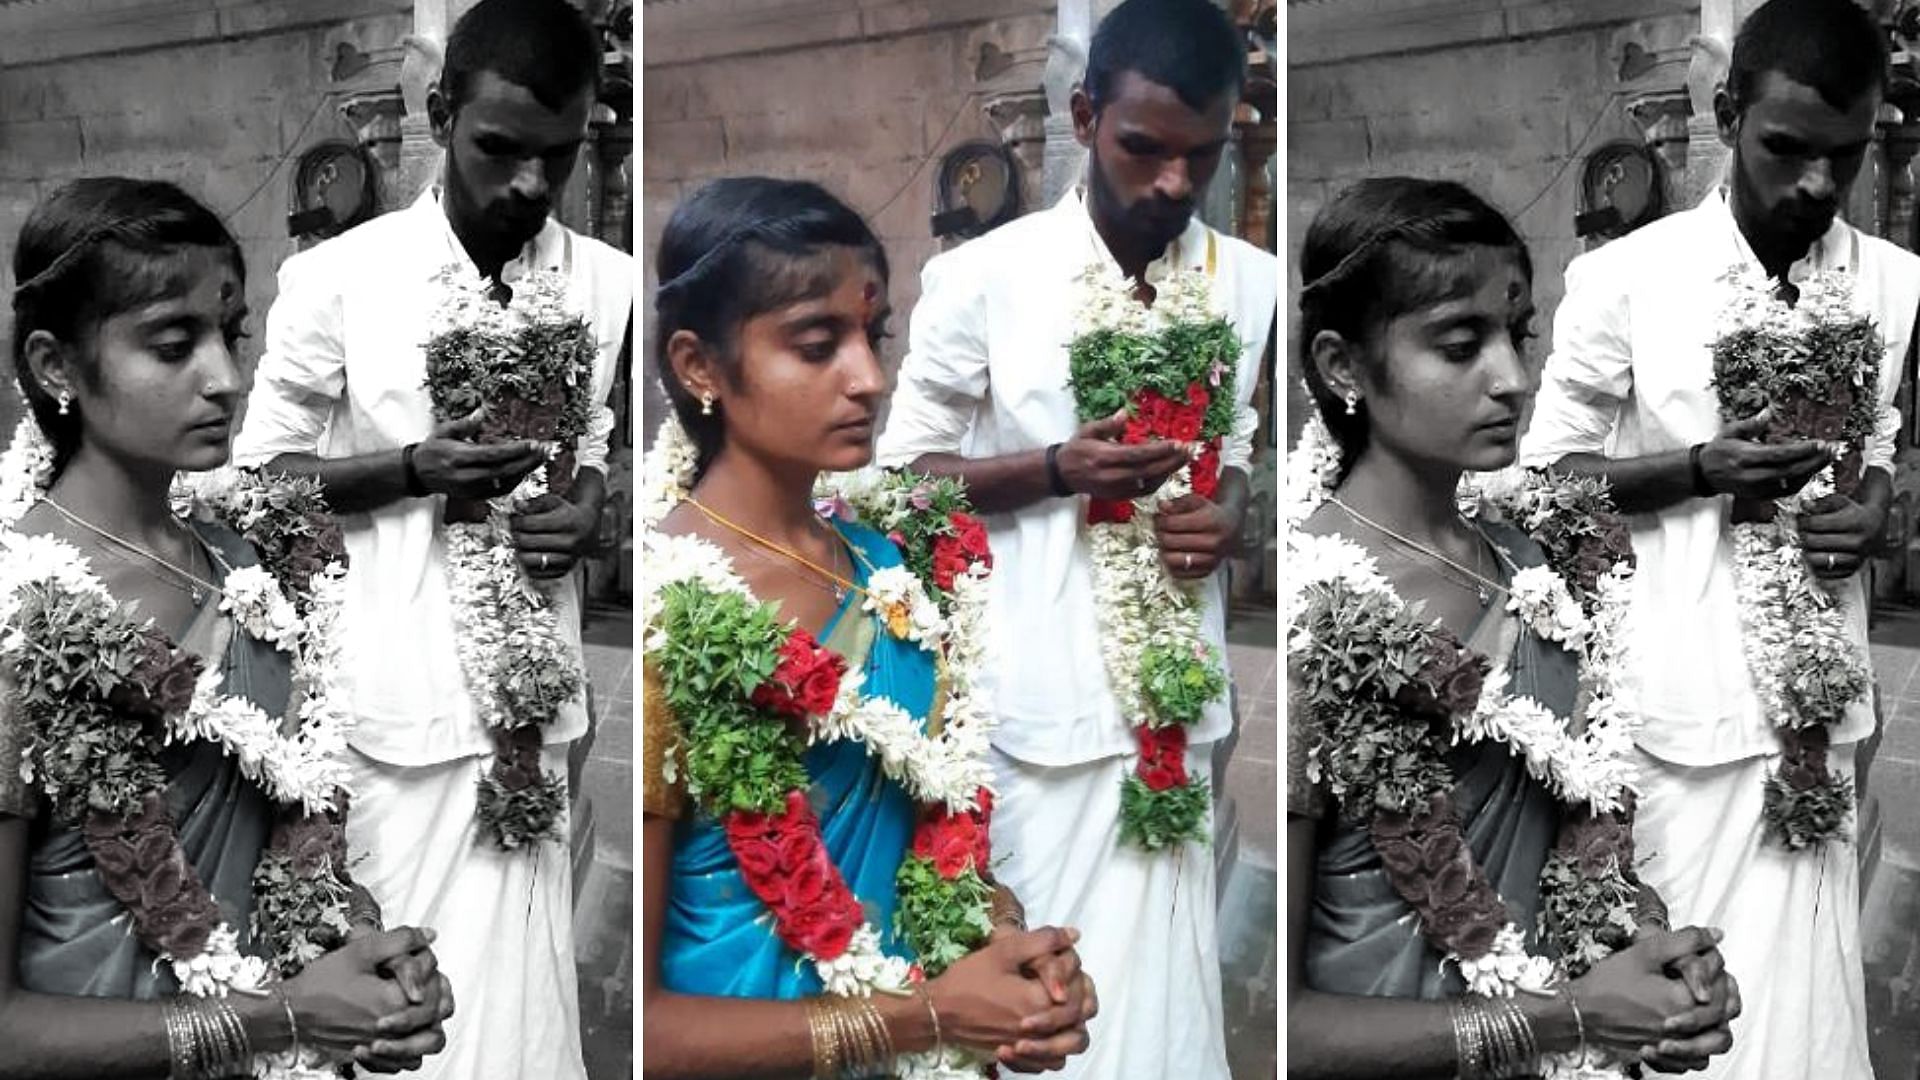 Jothi and Solairaj were murdered on the morning of 3 July, in their front yard in Tamil Nadu’s Thoothukudi district.